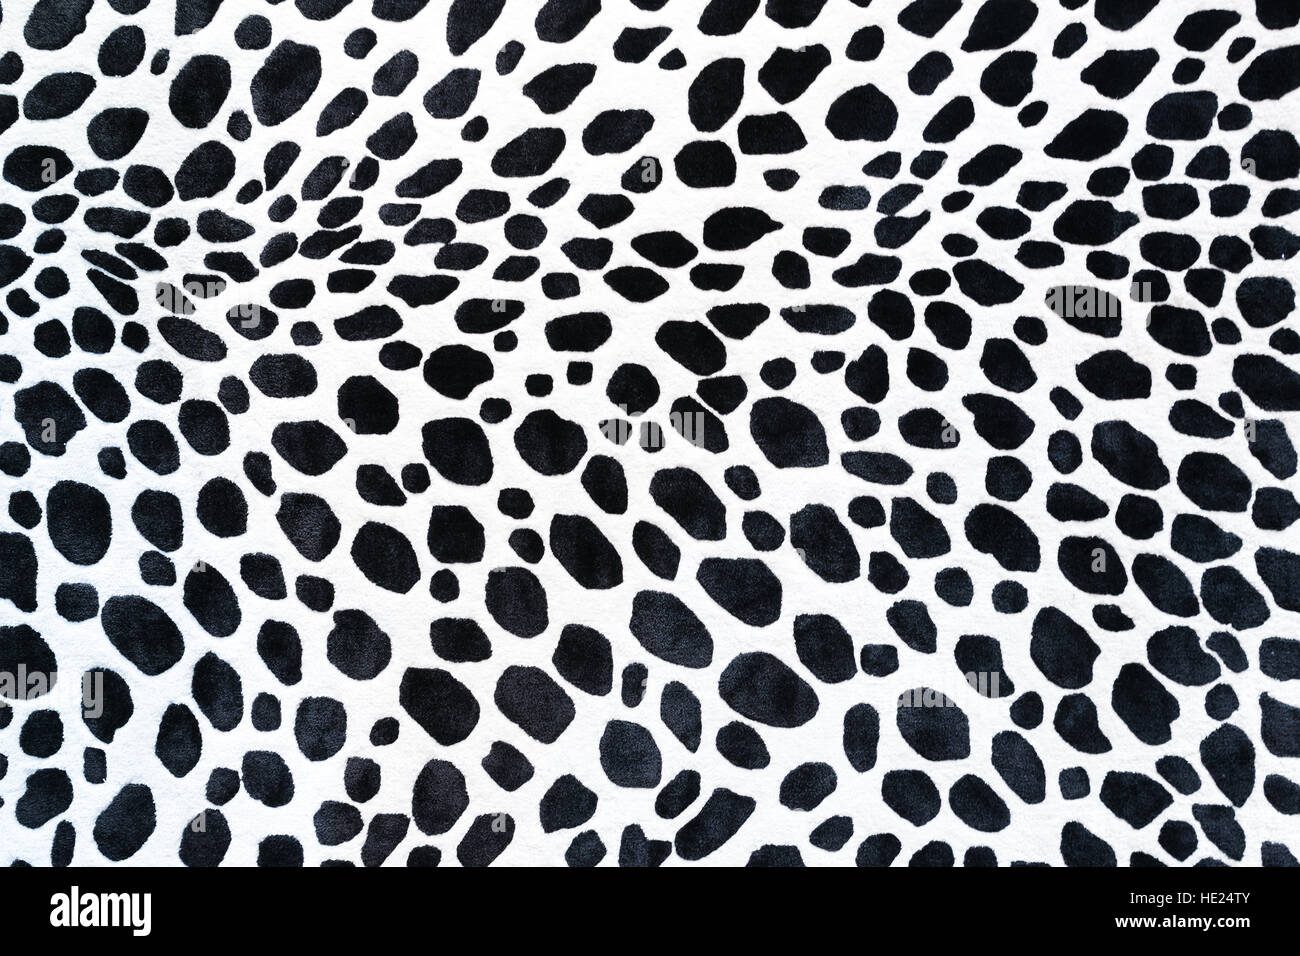 Seamless animal pattern for textile design. Seamless pattern of dalmatian spots. Natural textures. Stock Photo